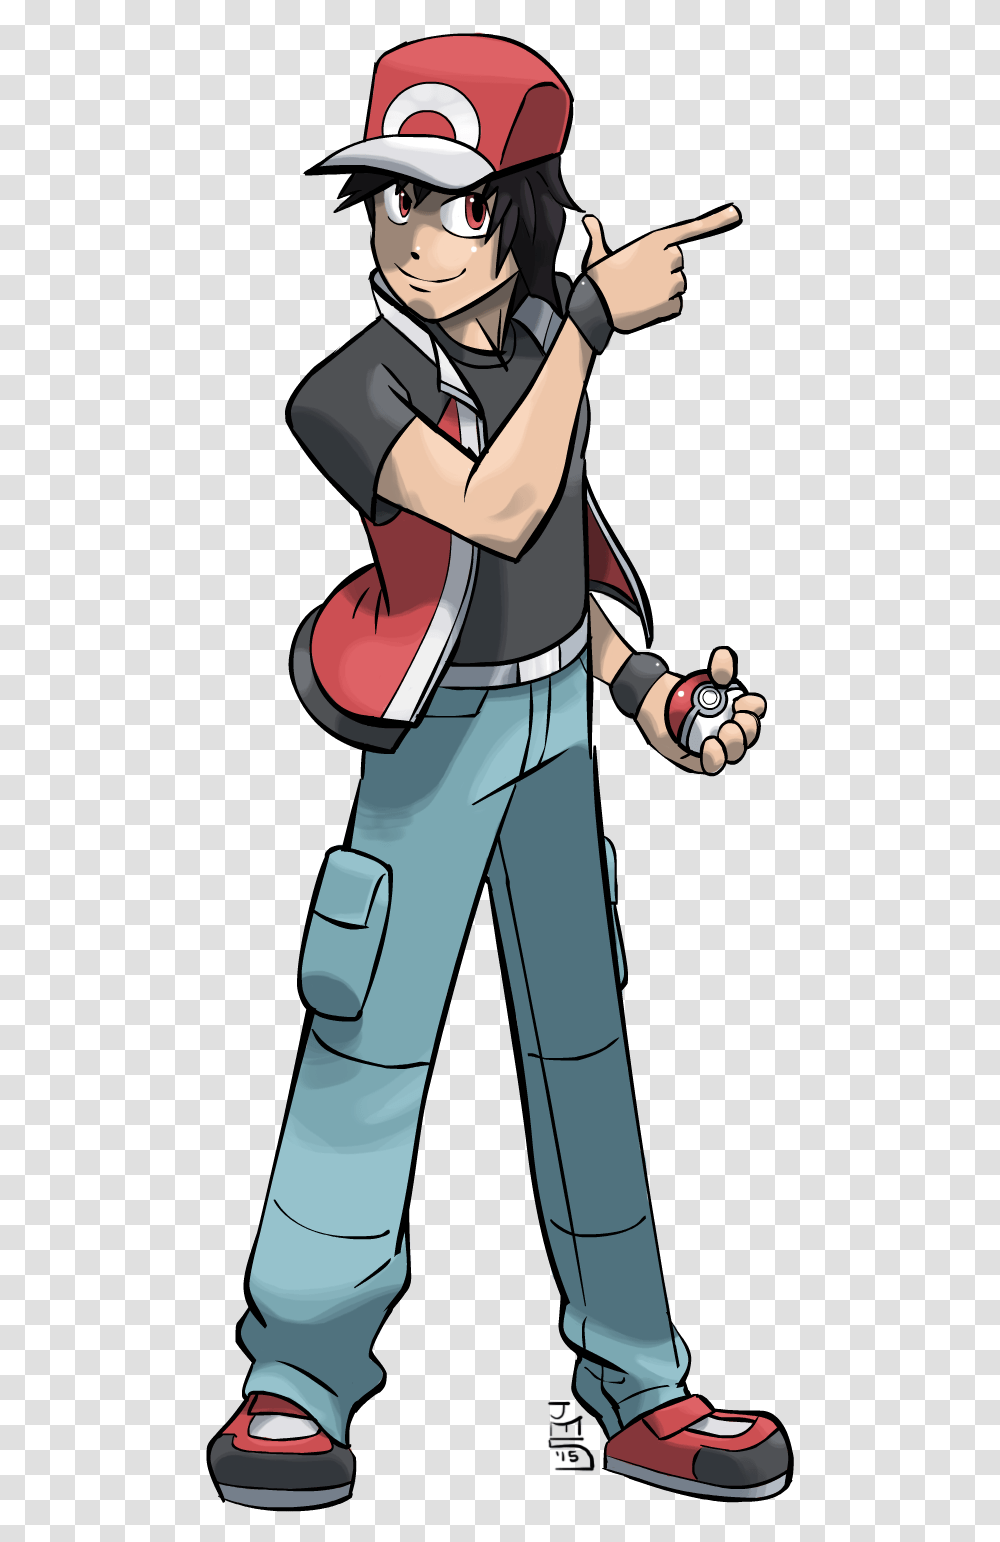 Cool Pokemon Trainer Designs, Person, Sunglasses, Hand, People Transparent Png